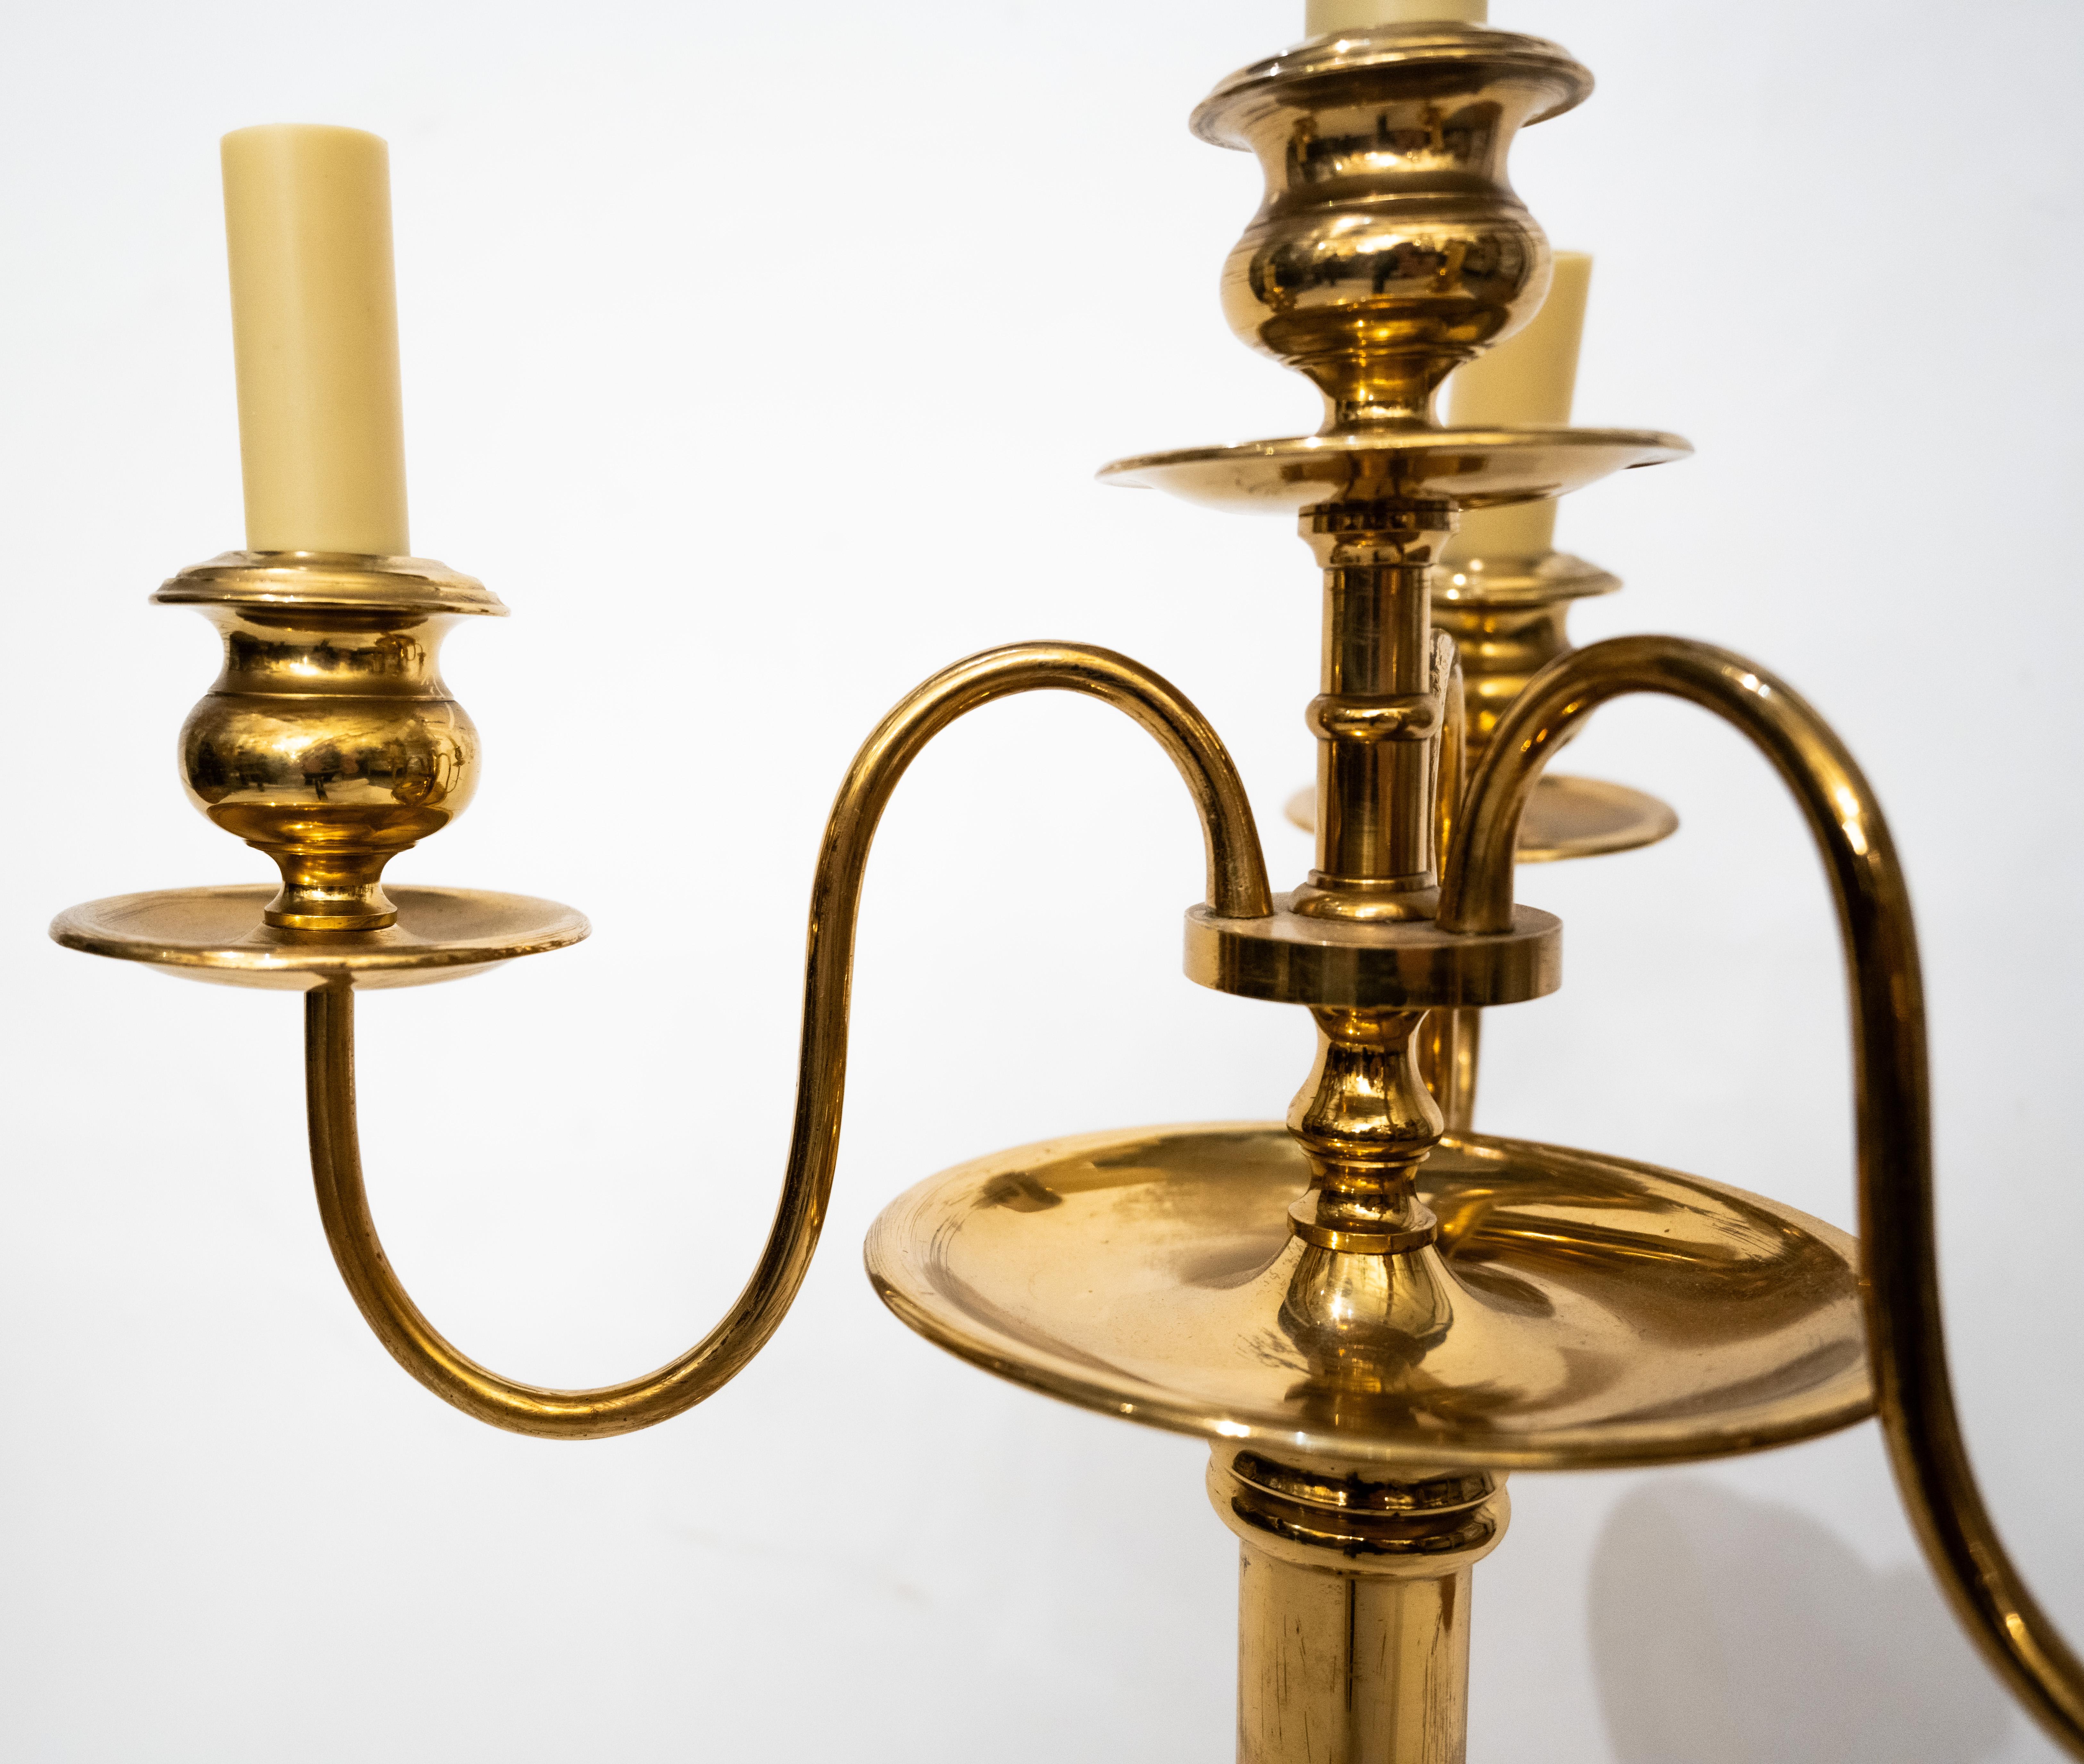 A pair of four-light Skultuna bronze candlesticks with three upswept branches, issuing from the center candlestick with original patina and lacquer and a unique bronze stem. Can be used as a candelabra or converted into a bouillotte light.